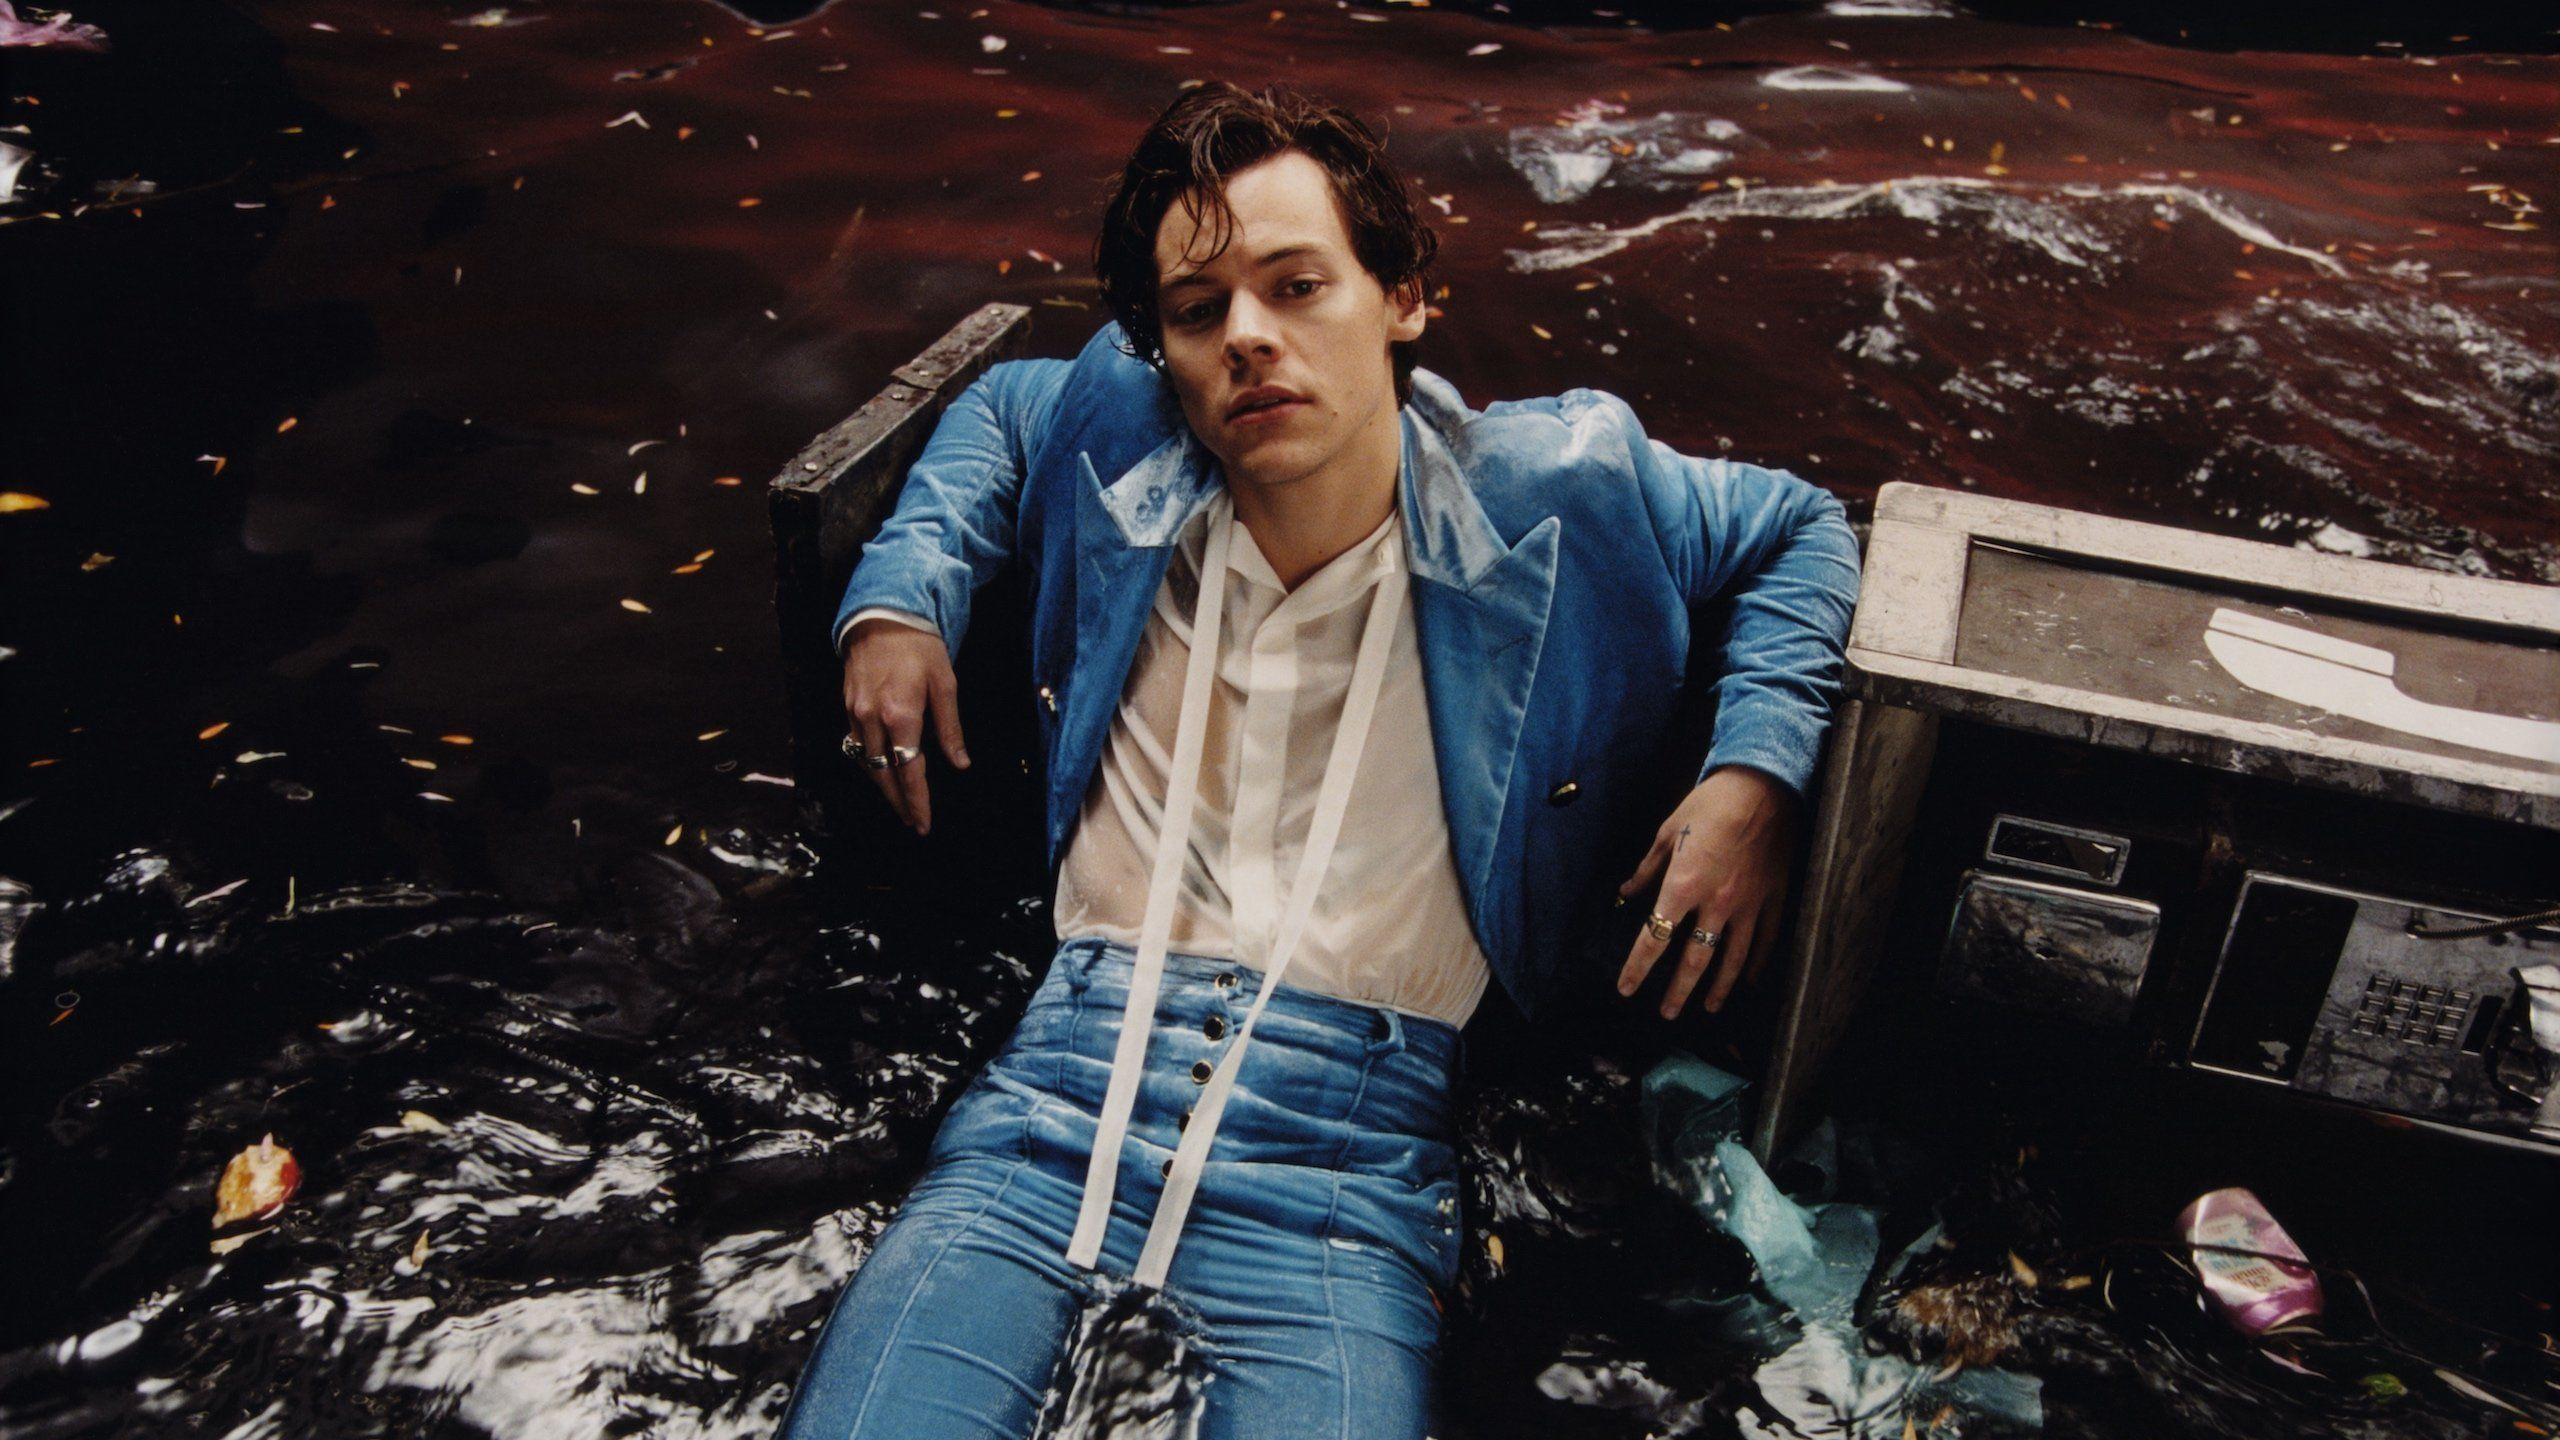 Harry Styles and the New York Apocalypse by G.B. Hope